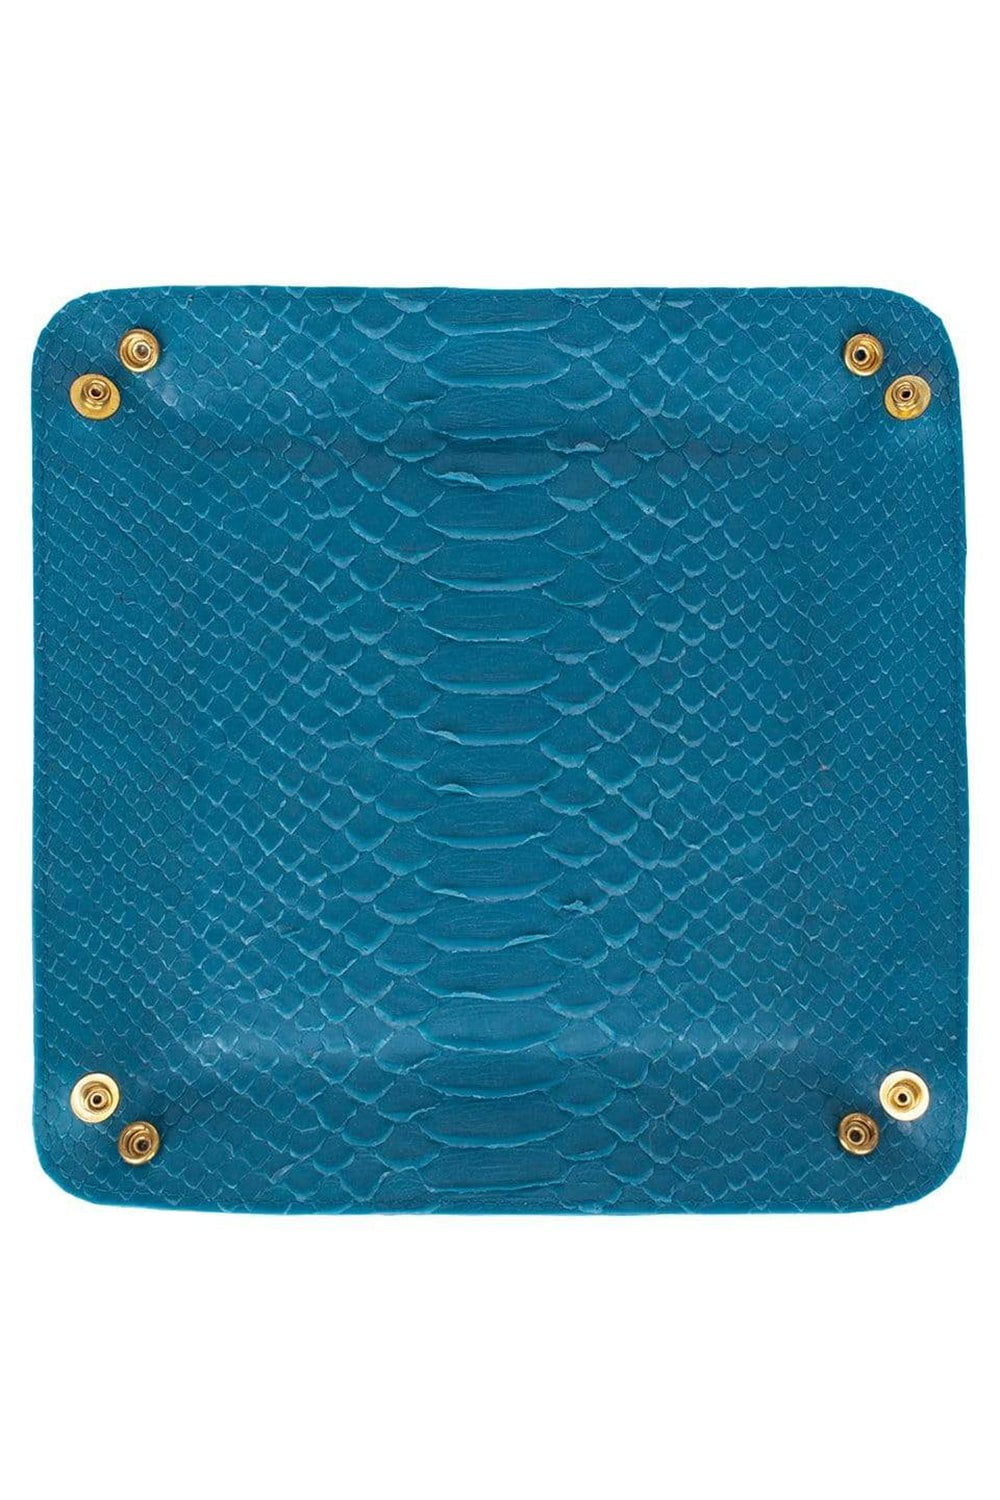 RIVERS EIGHT-Turquoise Catchall Tray-TURQ